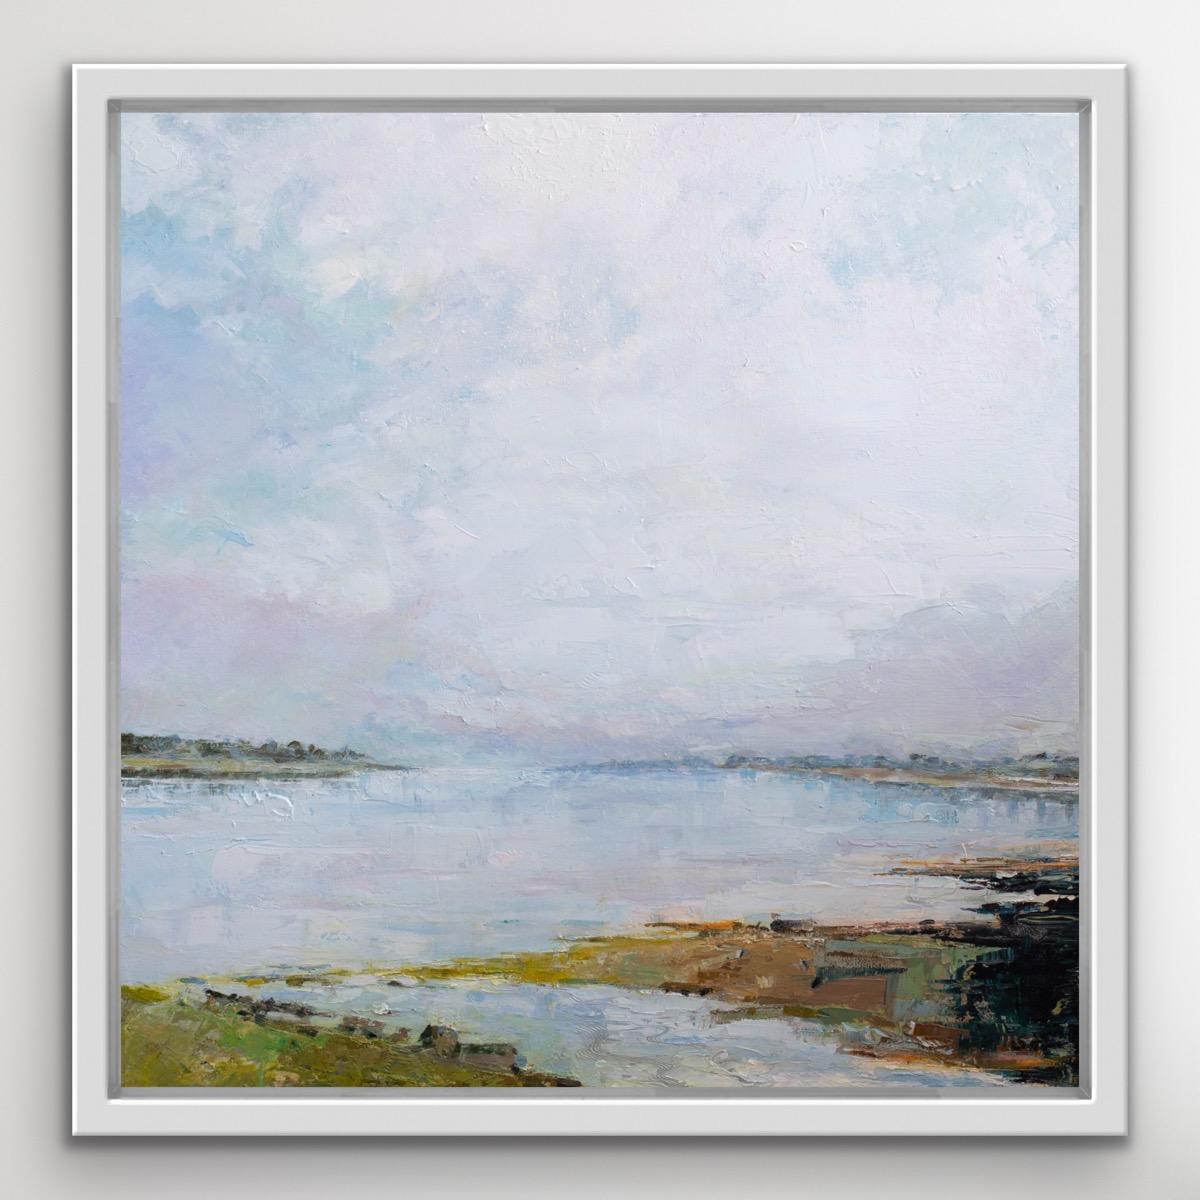 The calming tones of Tranquil Waters makes this the perfect work for your bedroom, office or living room.
David Whitbread-Roberts is available online and in our gallery at Wychwood Art. David was born in Cornwall and studied for a degree in Fine Art